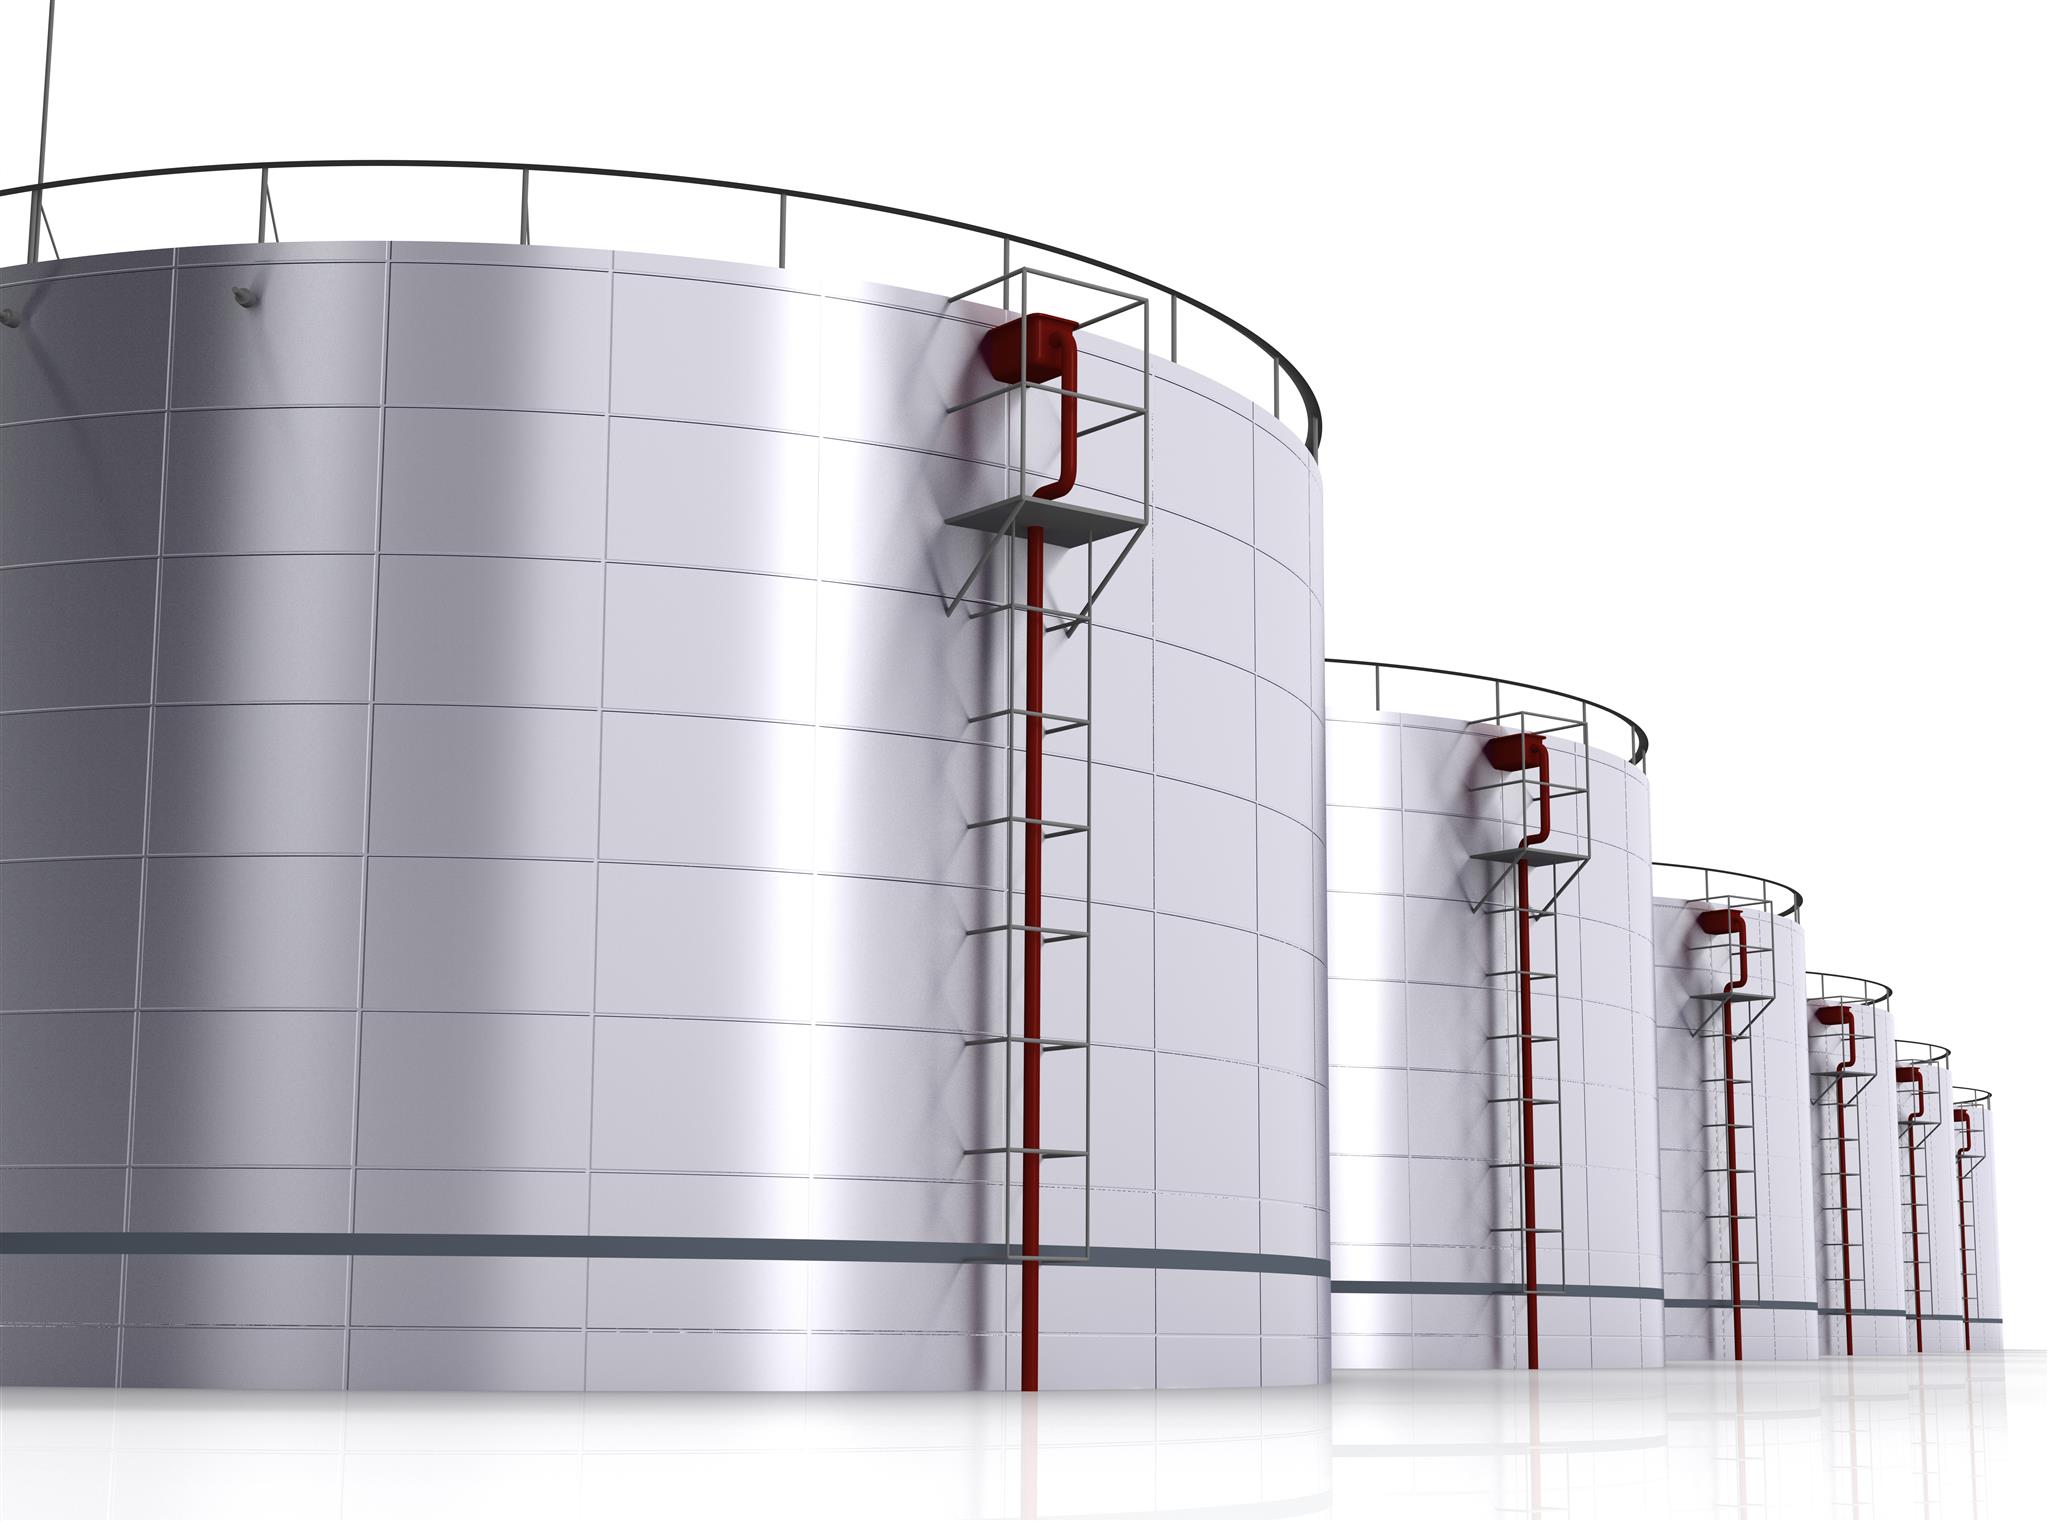 Guidelines for Secondary Containment Used for Industrial Tank